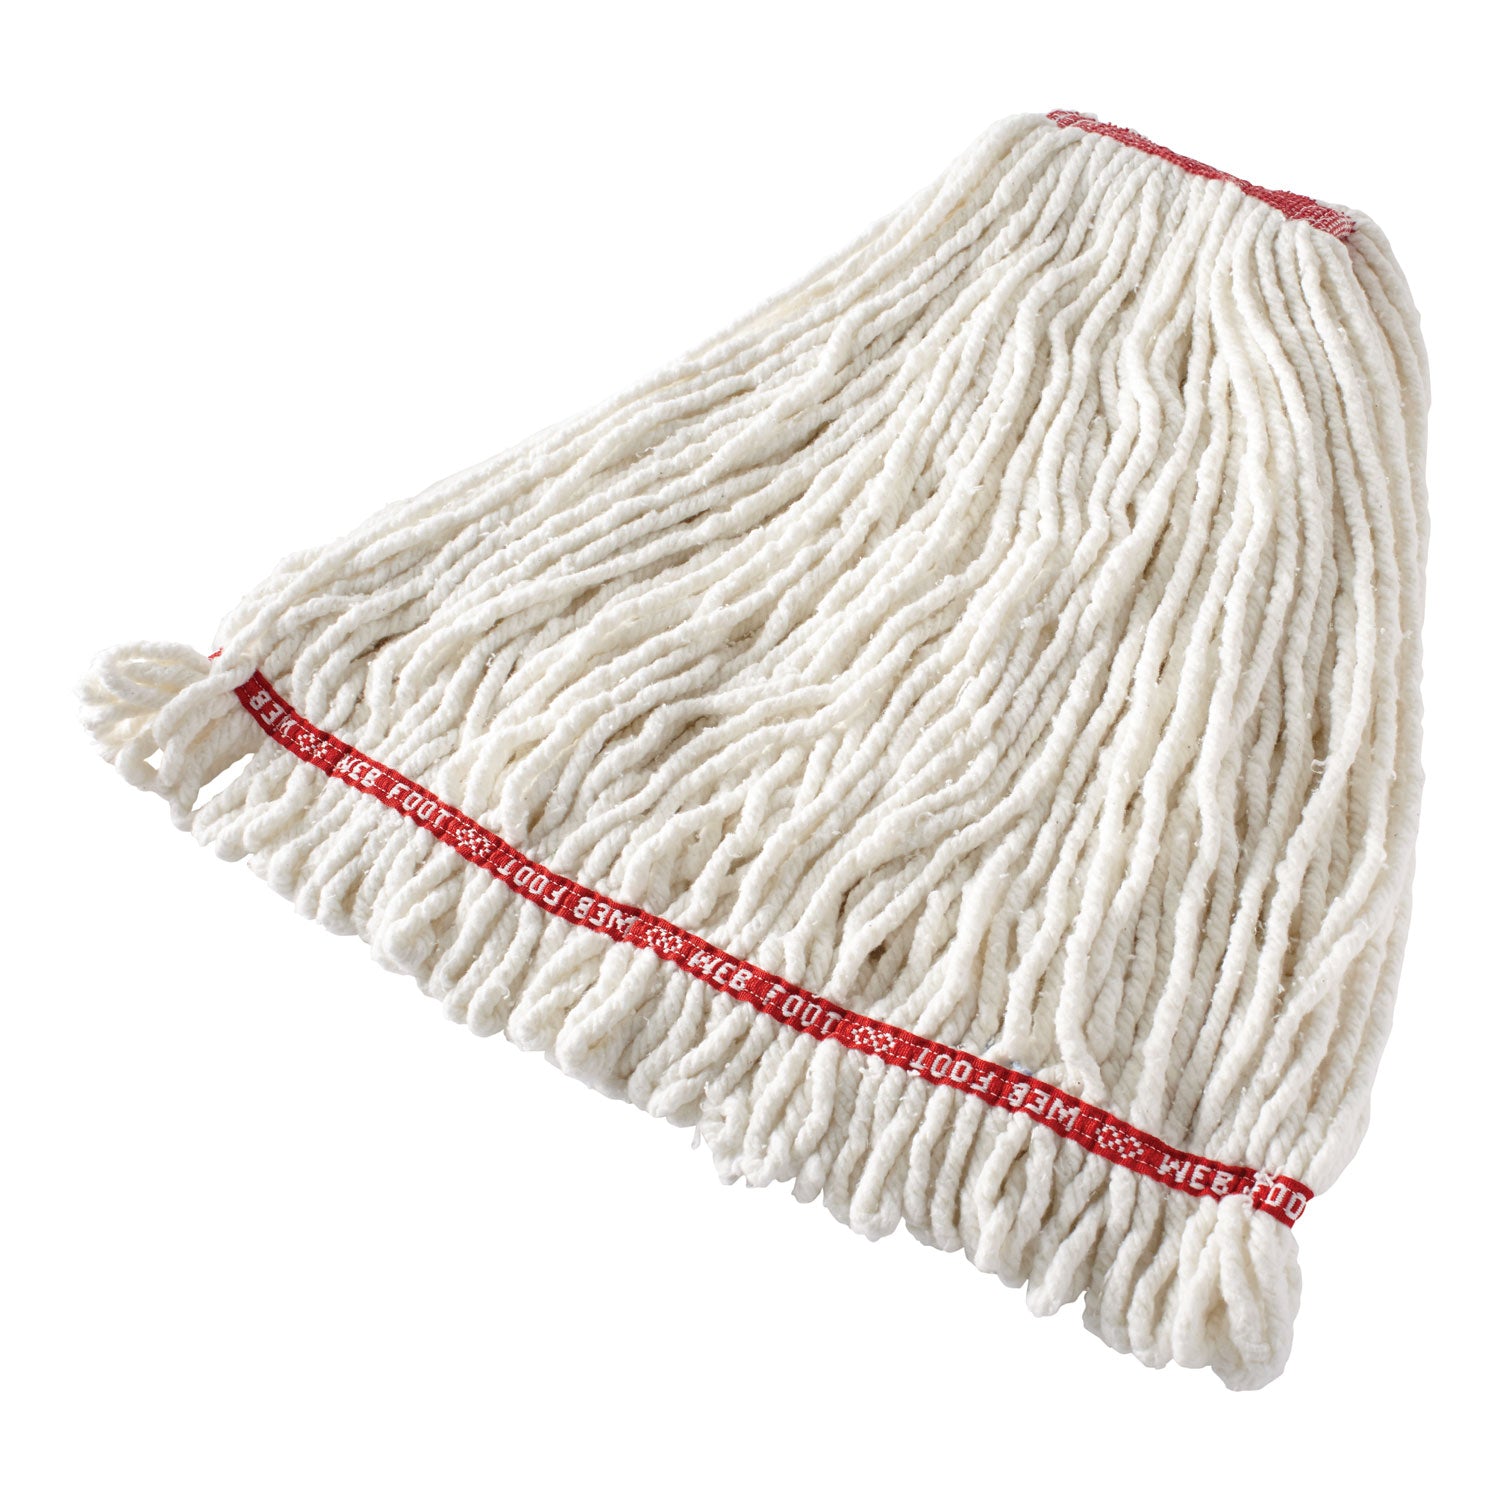 web-foot-shrinkless-looped-end-wet-mop-head-cotton-synthetic-large-white-1-white-headband_rcpa21306wh00 - 1